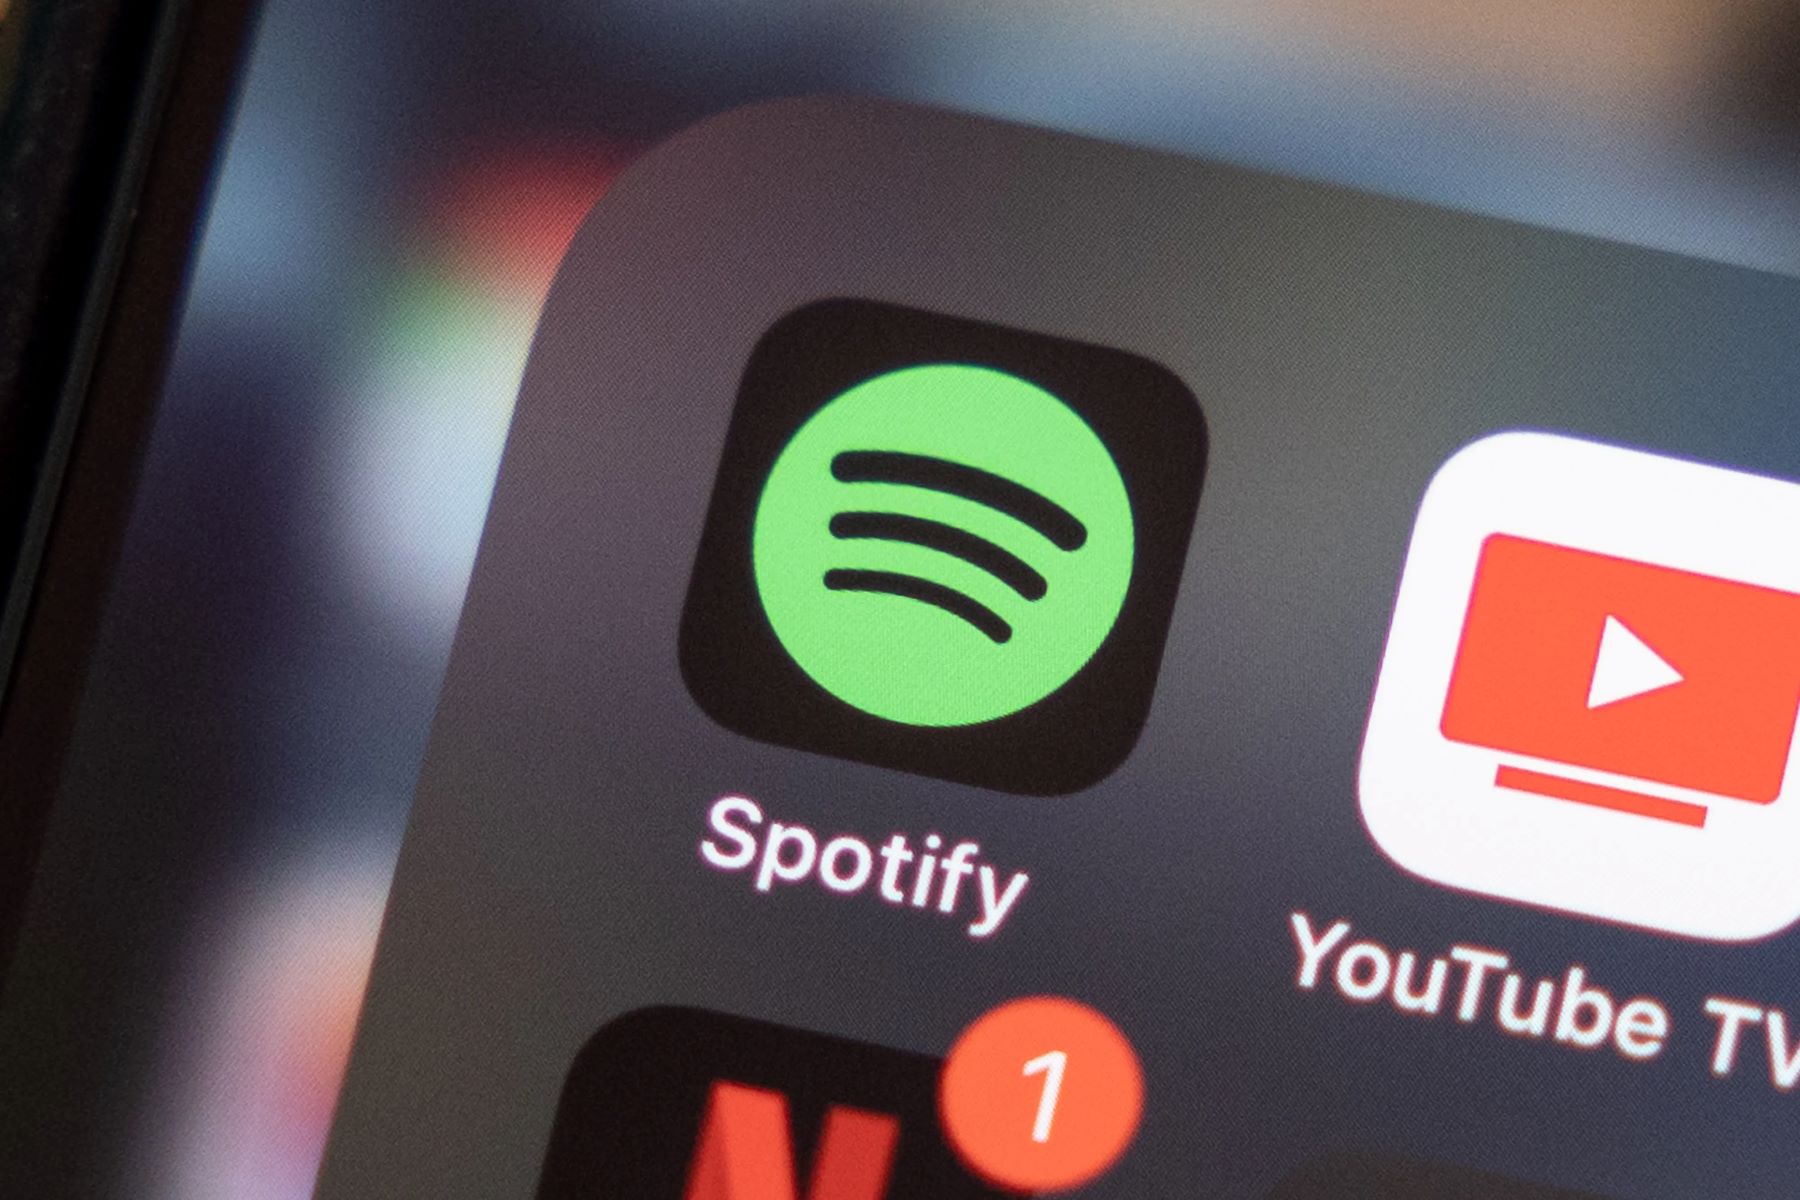 How To Change My Credit Card On Spotify